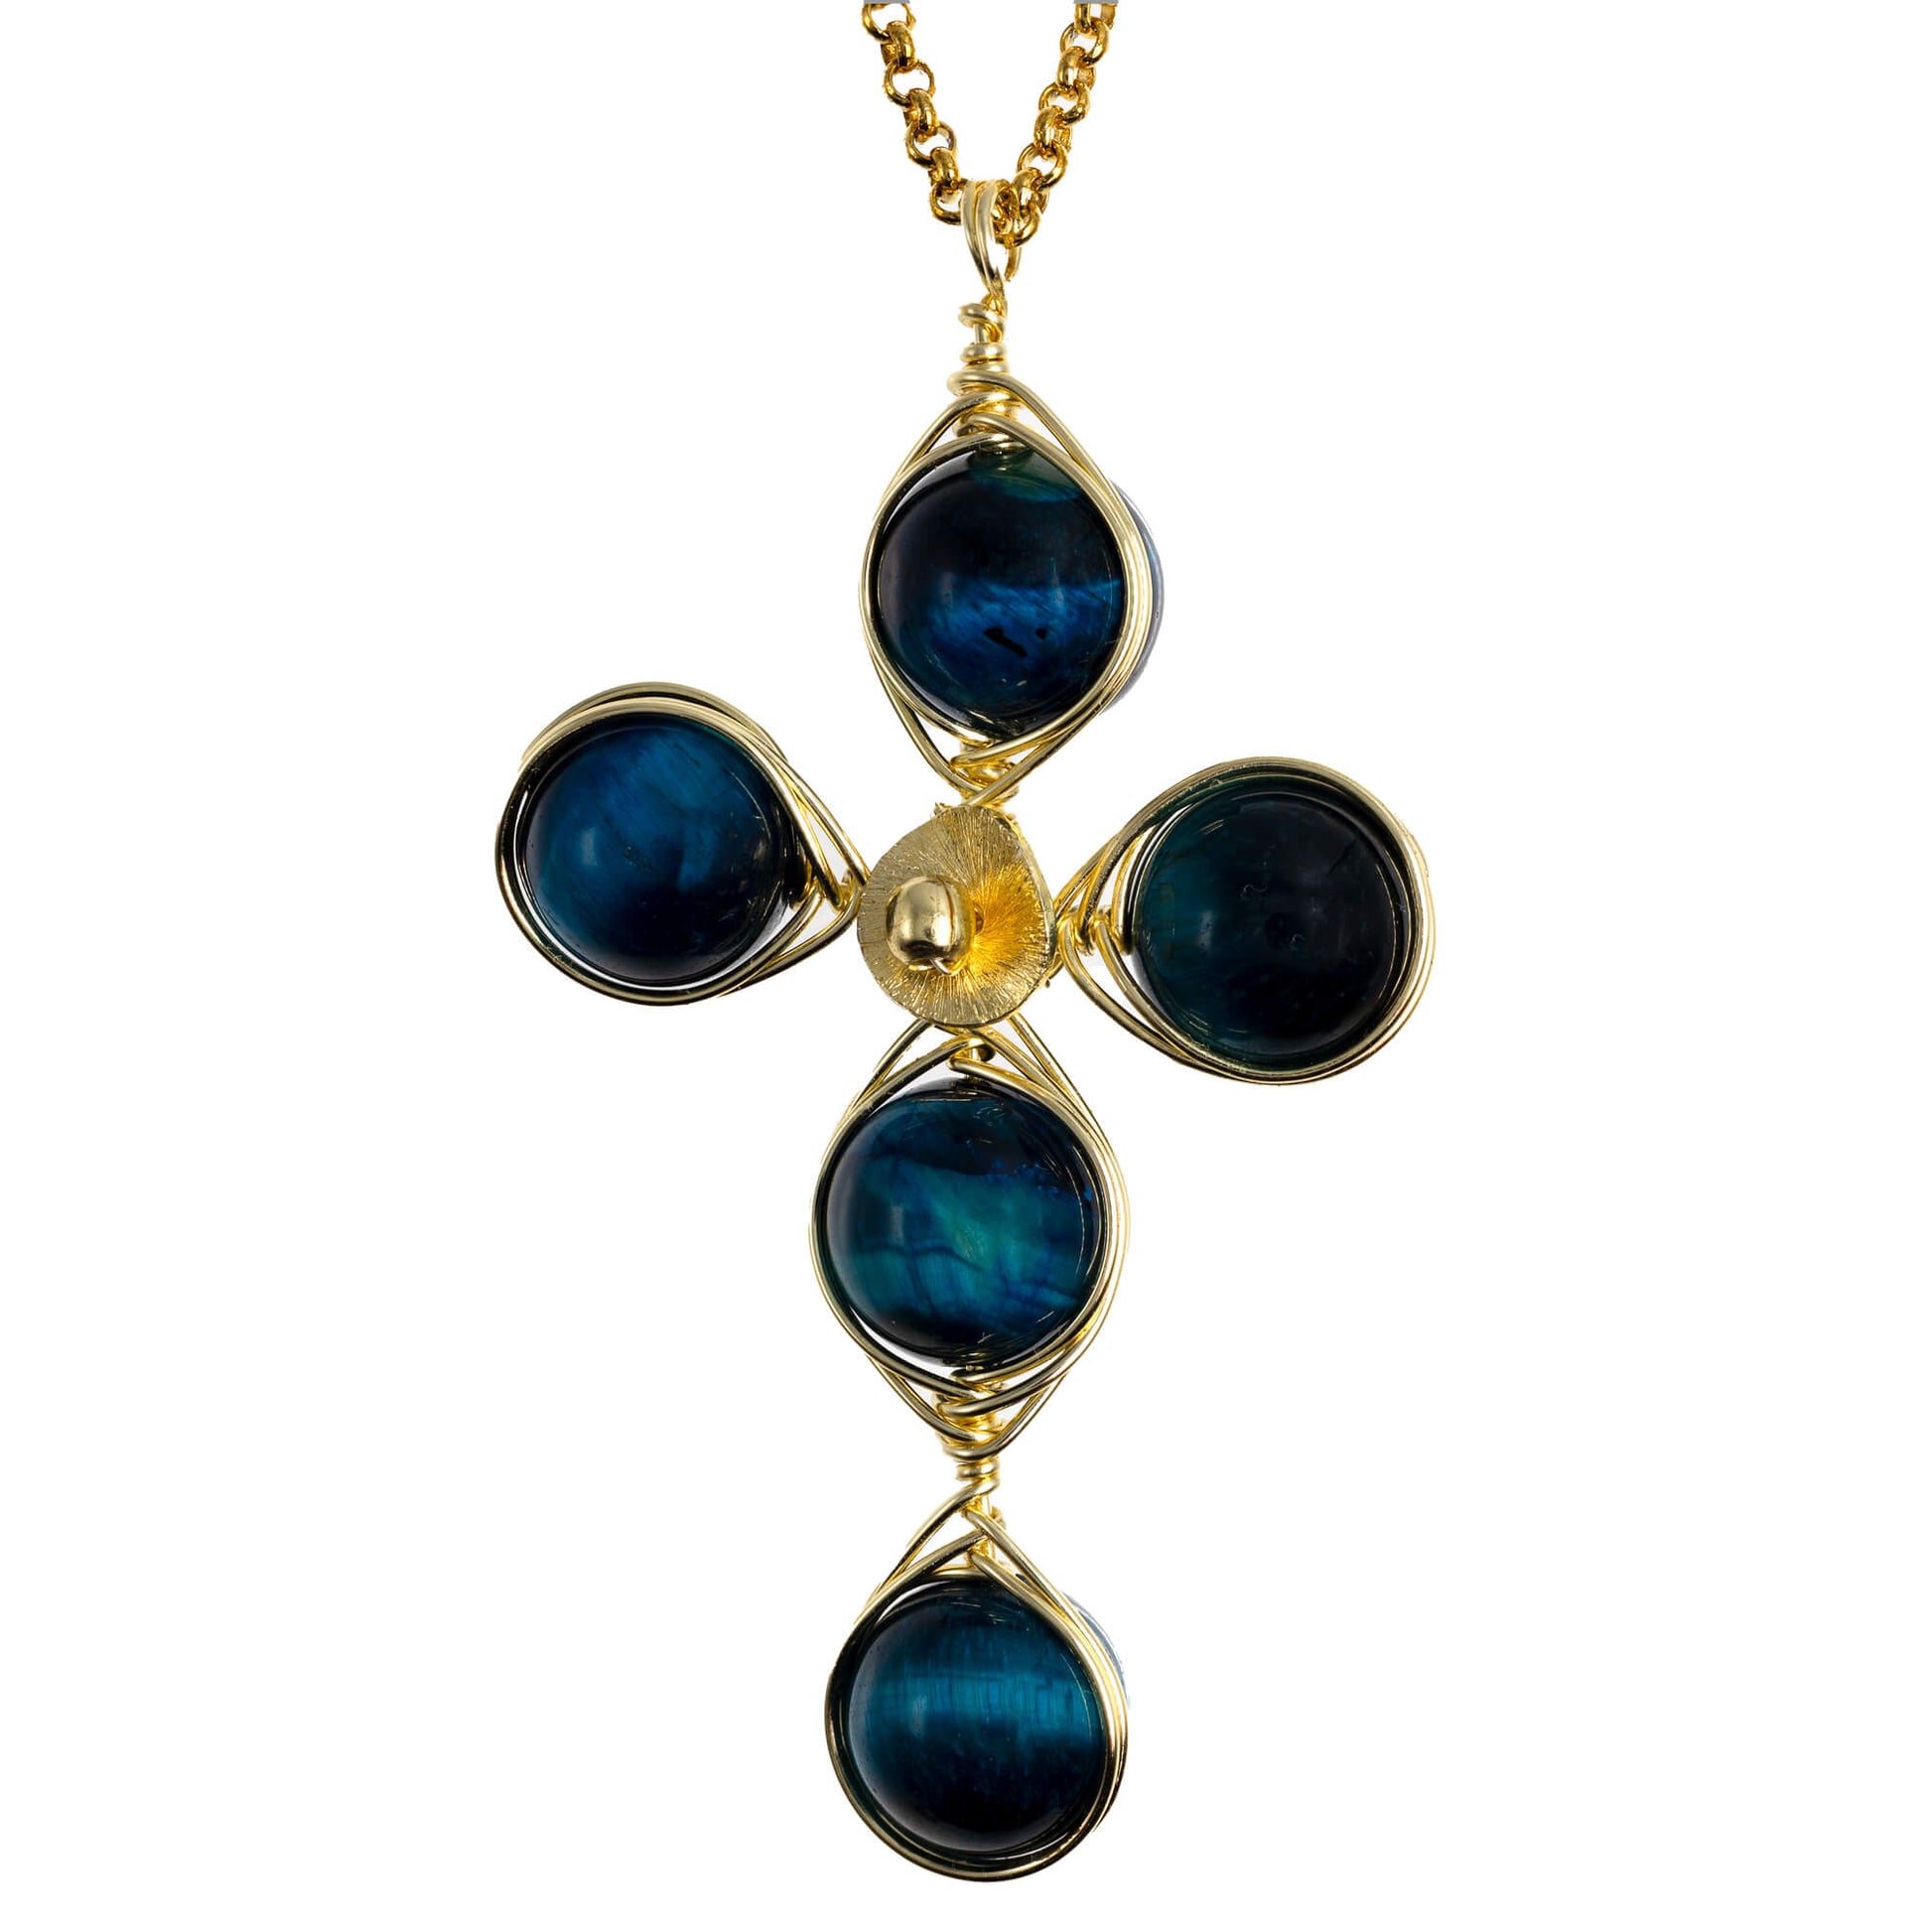 Encourage Cross Pendant Necklace is 2.5 inches long on a 16 inches 22K gold plated chain. Handmade with Non-tarnish gold plated wire and Polished Brown Tiger Eye Beads. Gold and Blue minimalist Wired Wrapped Cross.